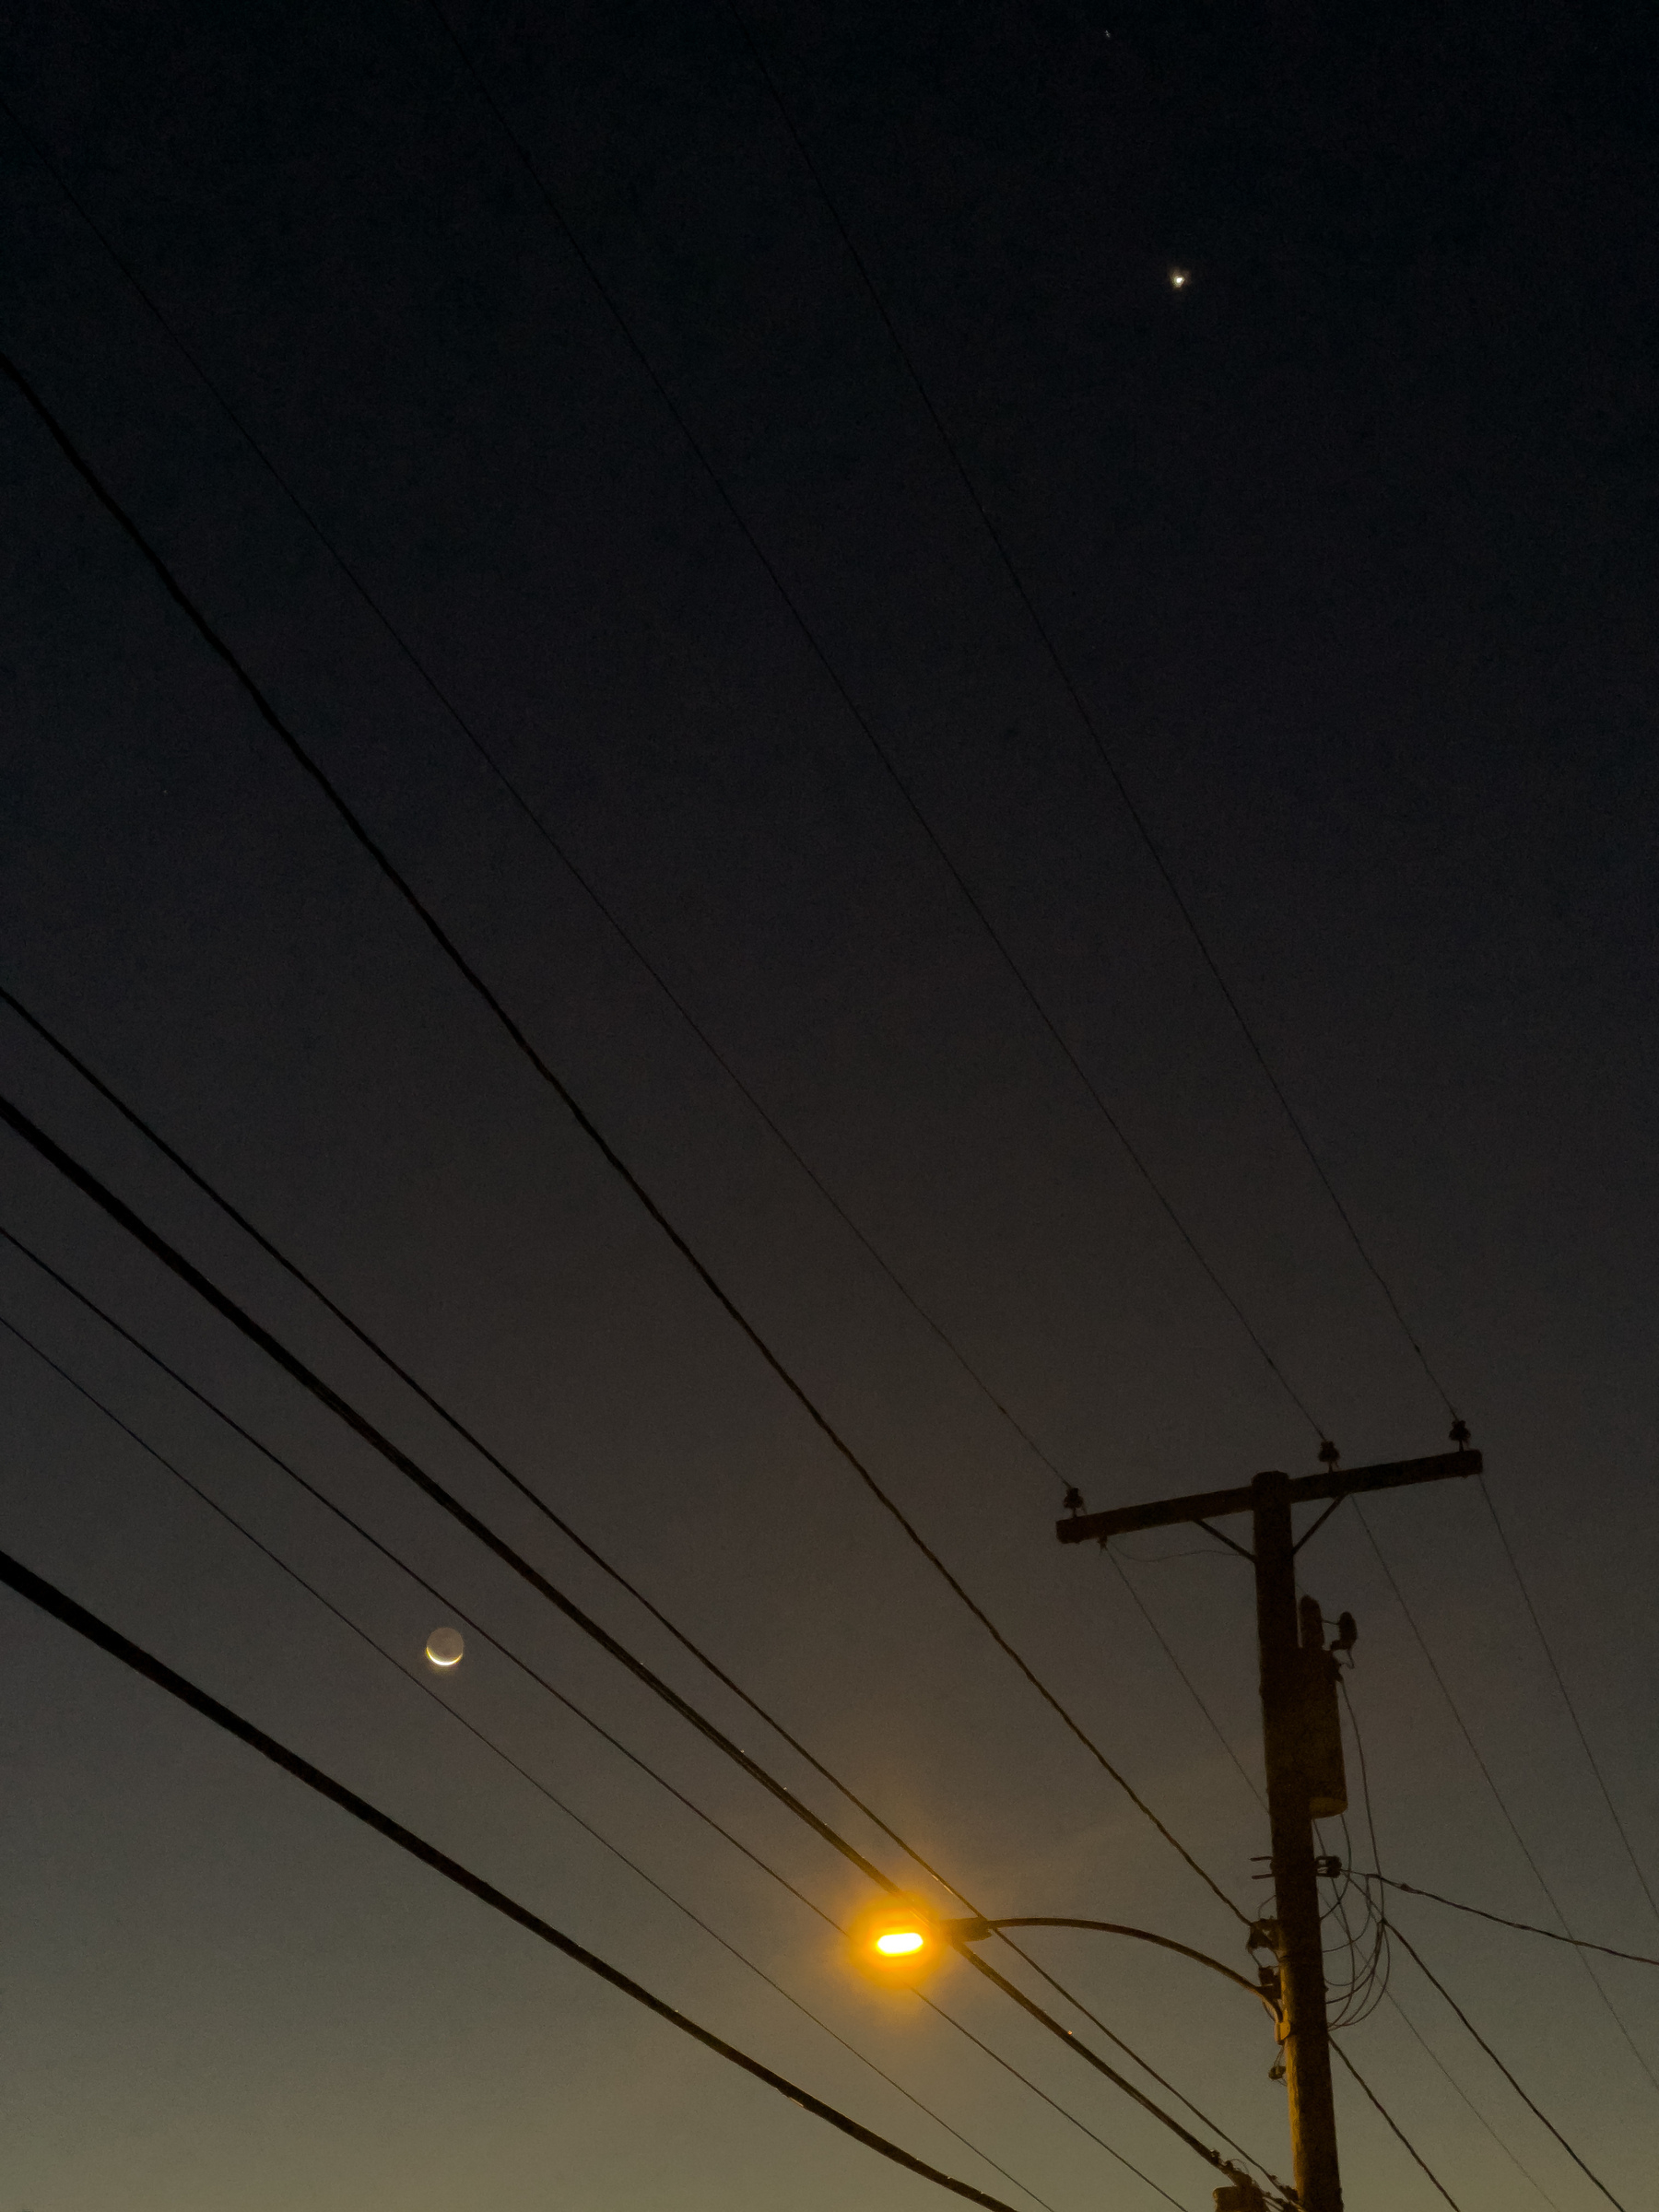 Venus and the Moon with silhouetted utility pole, wires and street light.